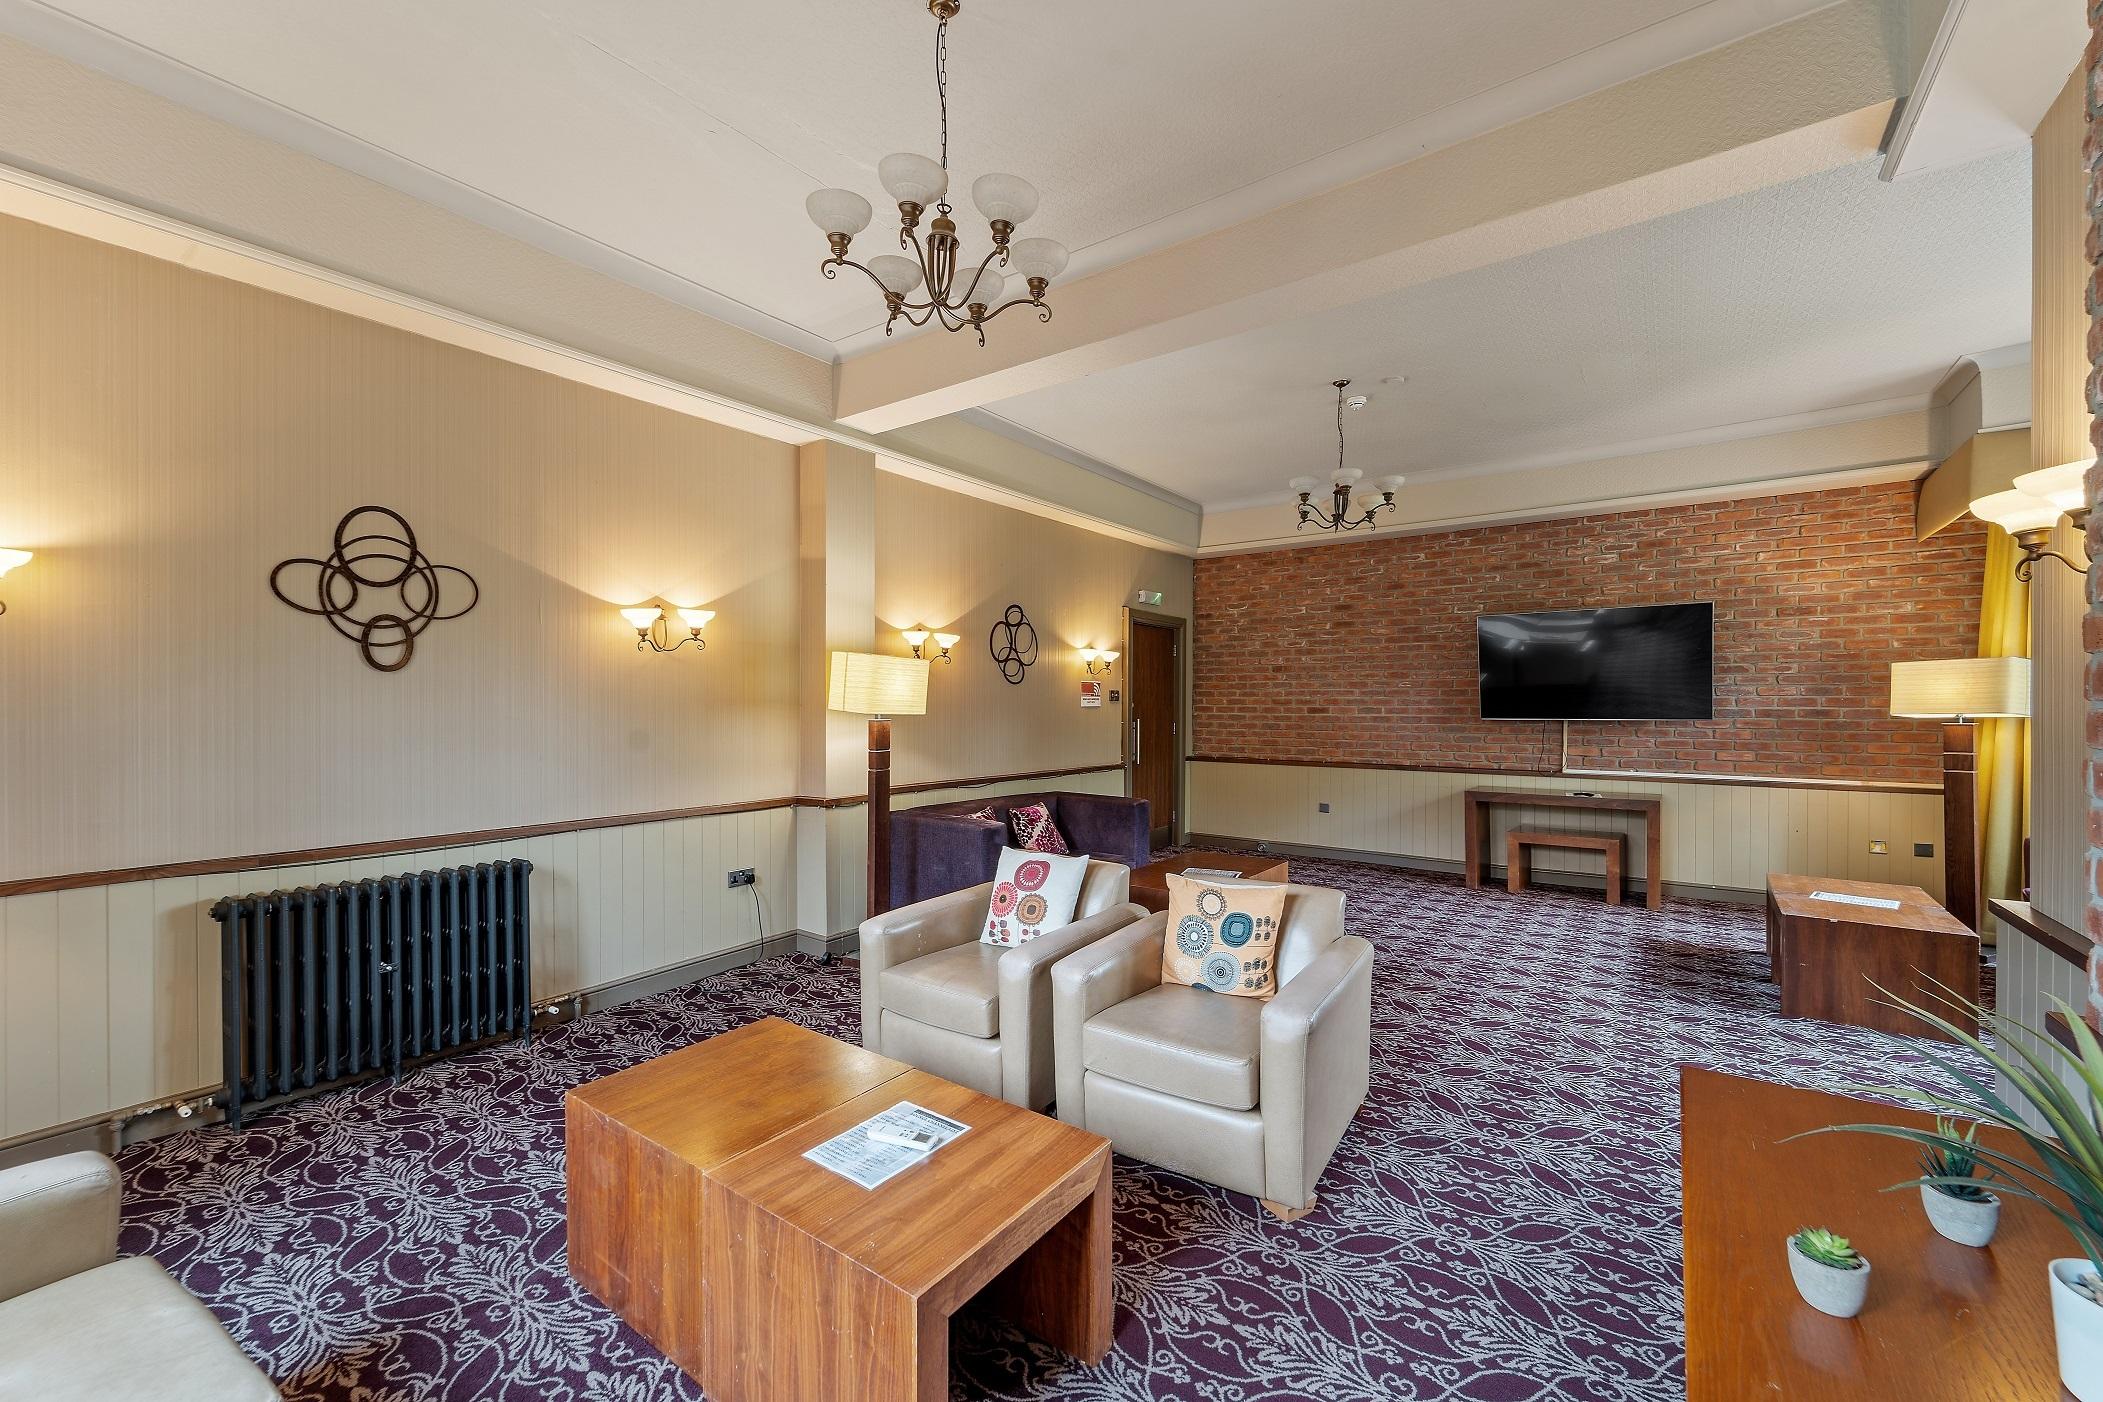 The Rutland Hotel, The Edale Suite photo #3